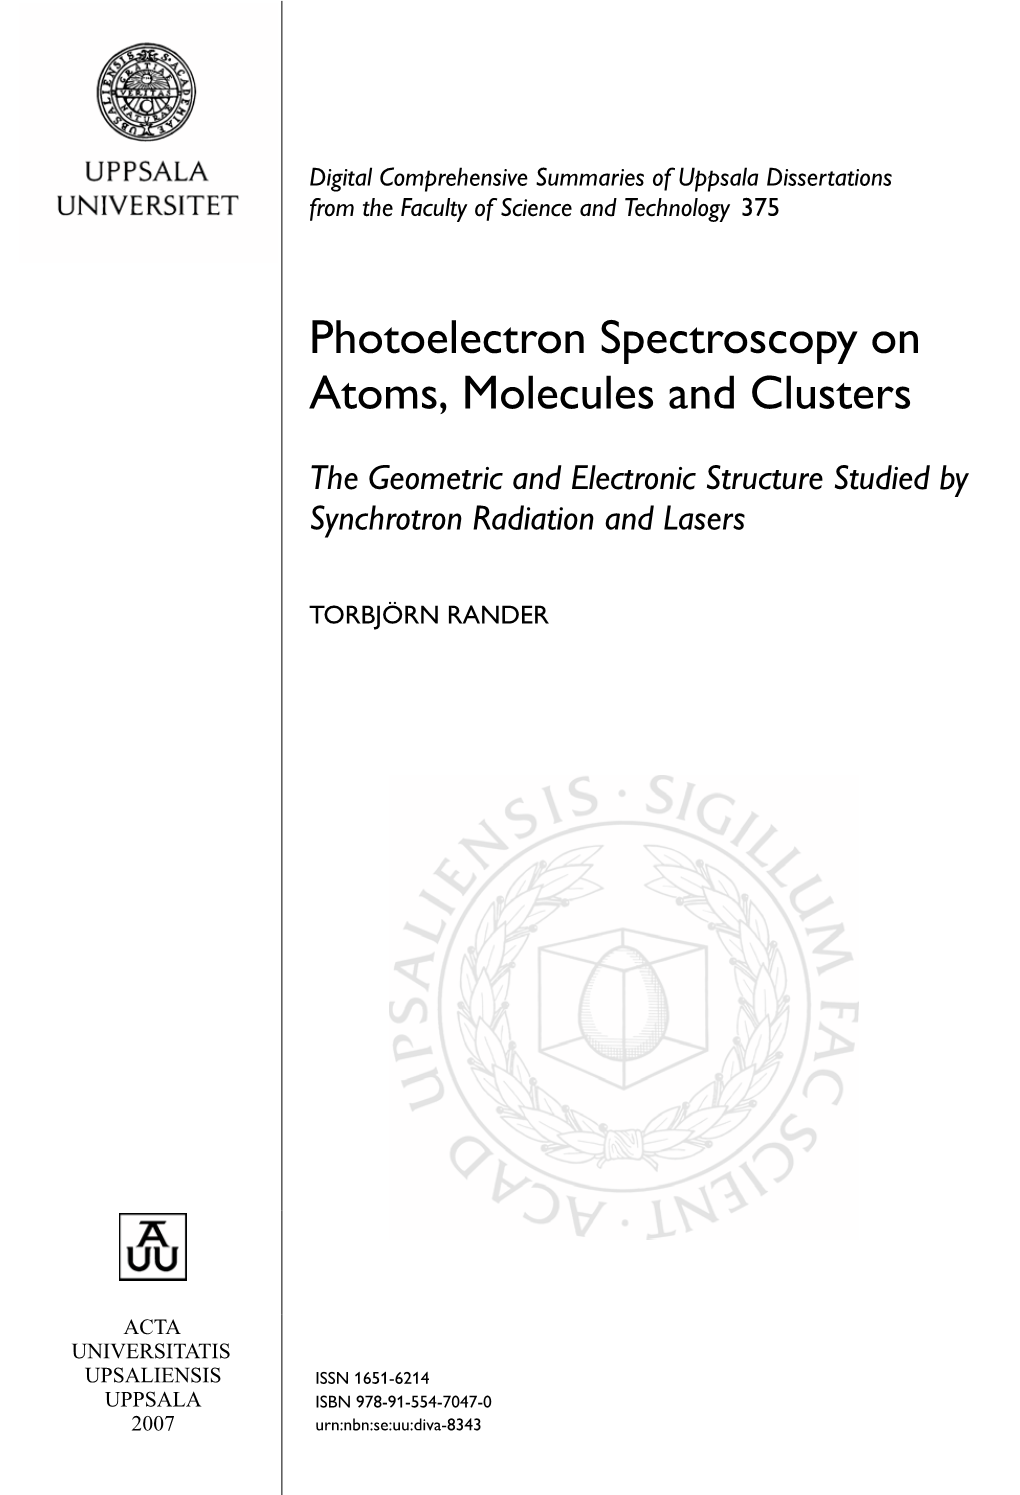 Photoelectron Spectroscopy on Atoms, Molecules and Clusters